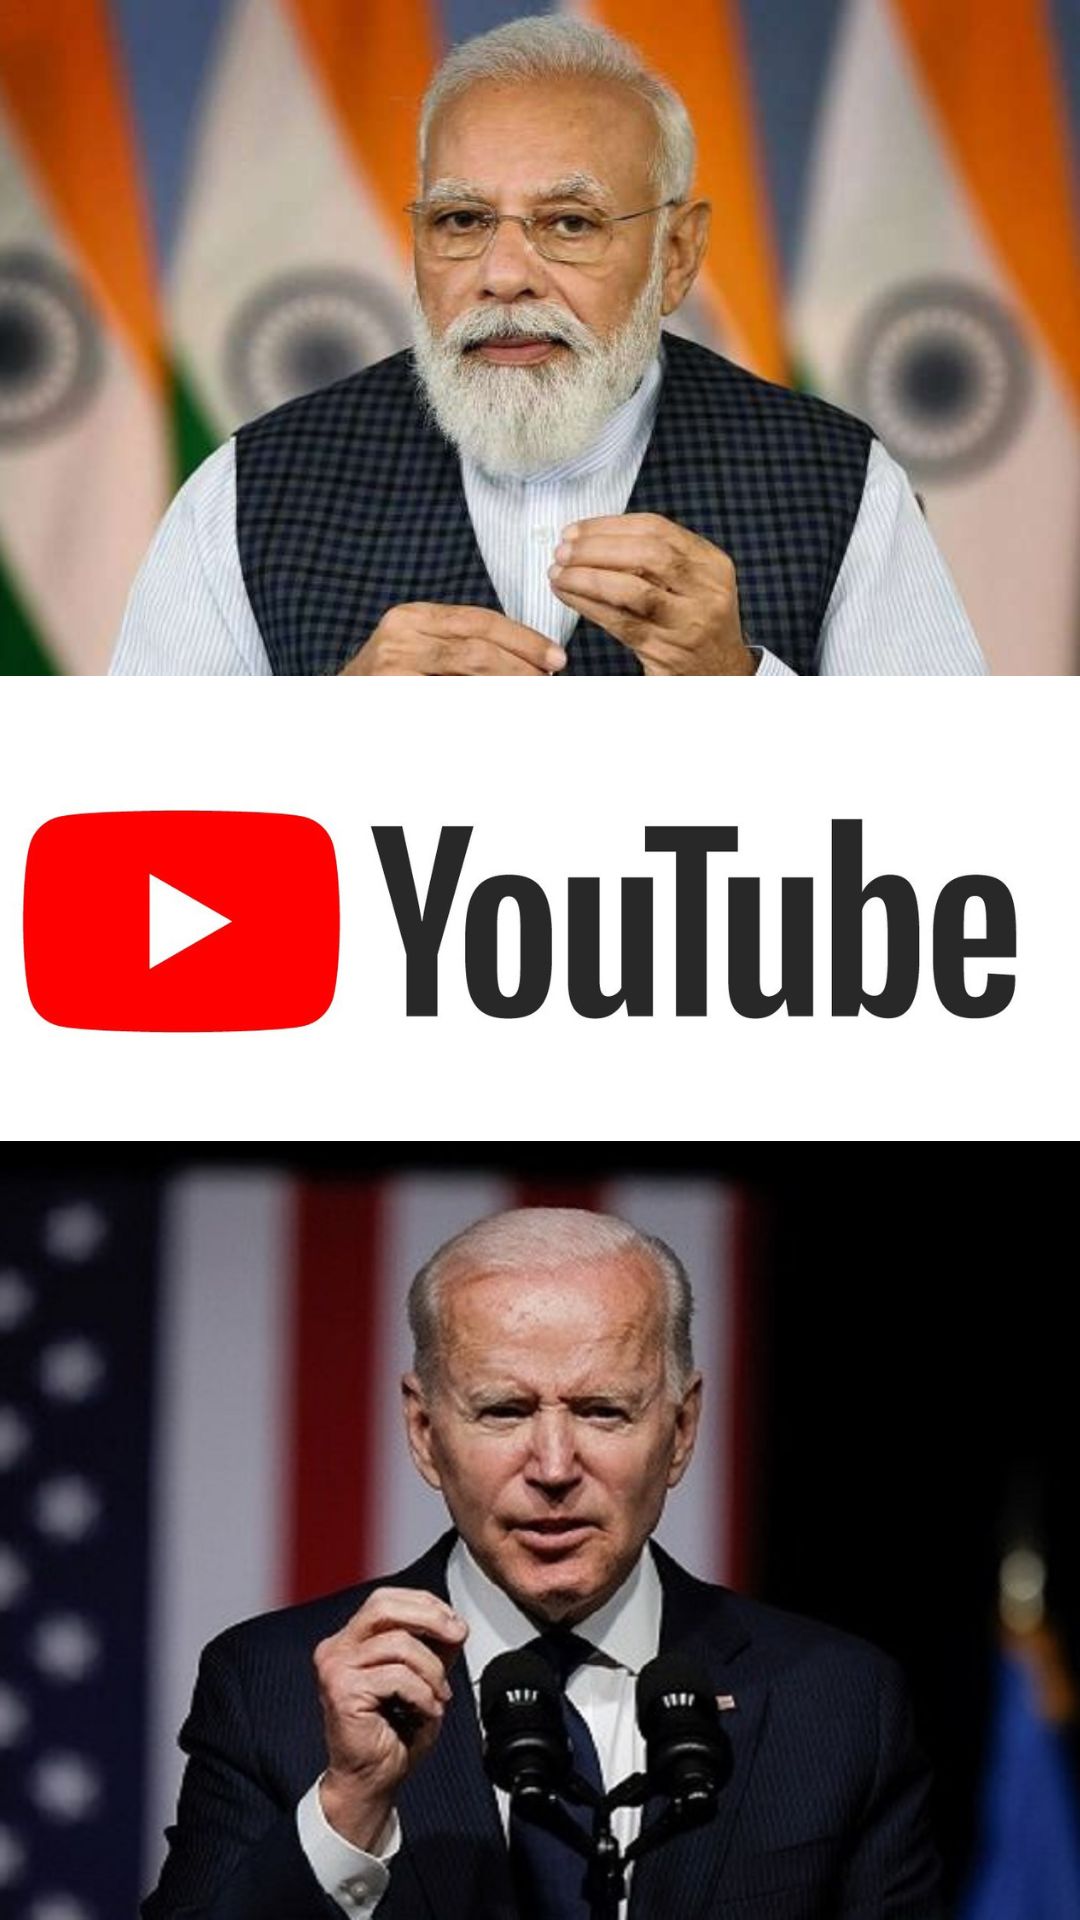 From Modi to Biden: Most followed global leaders on YouTube
